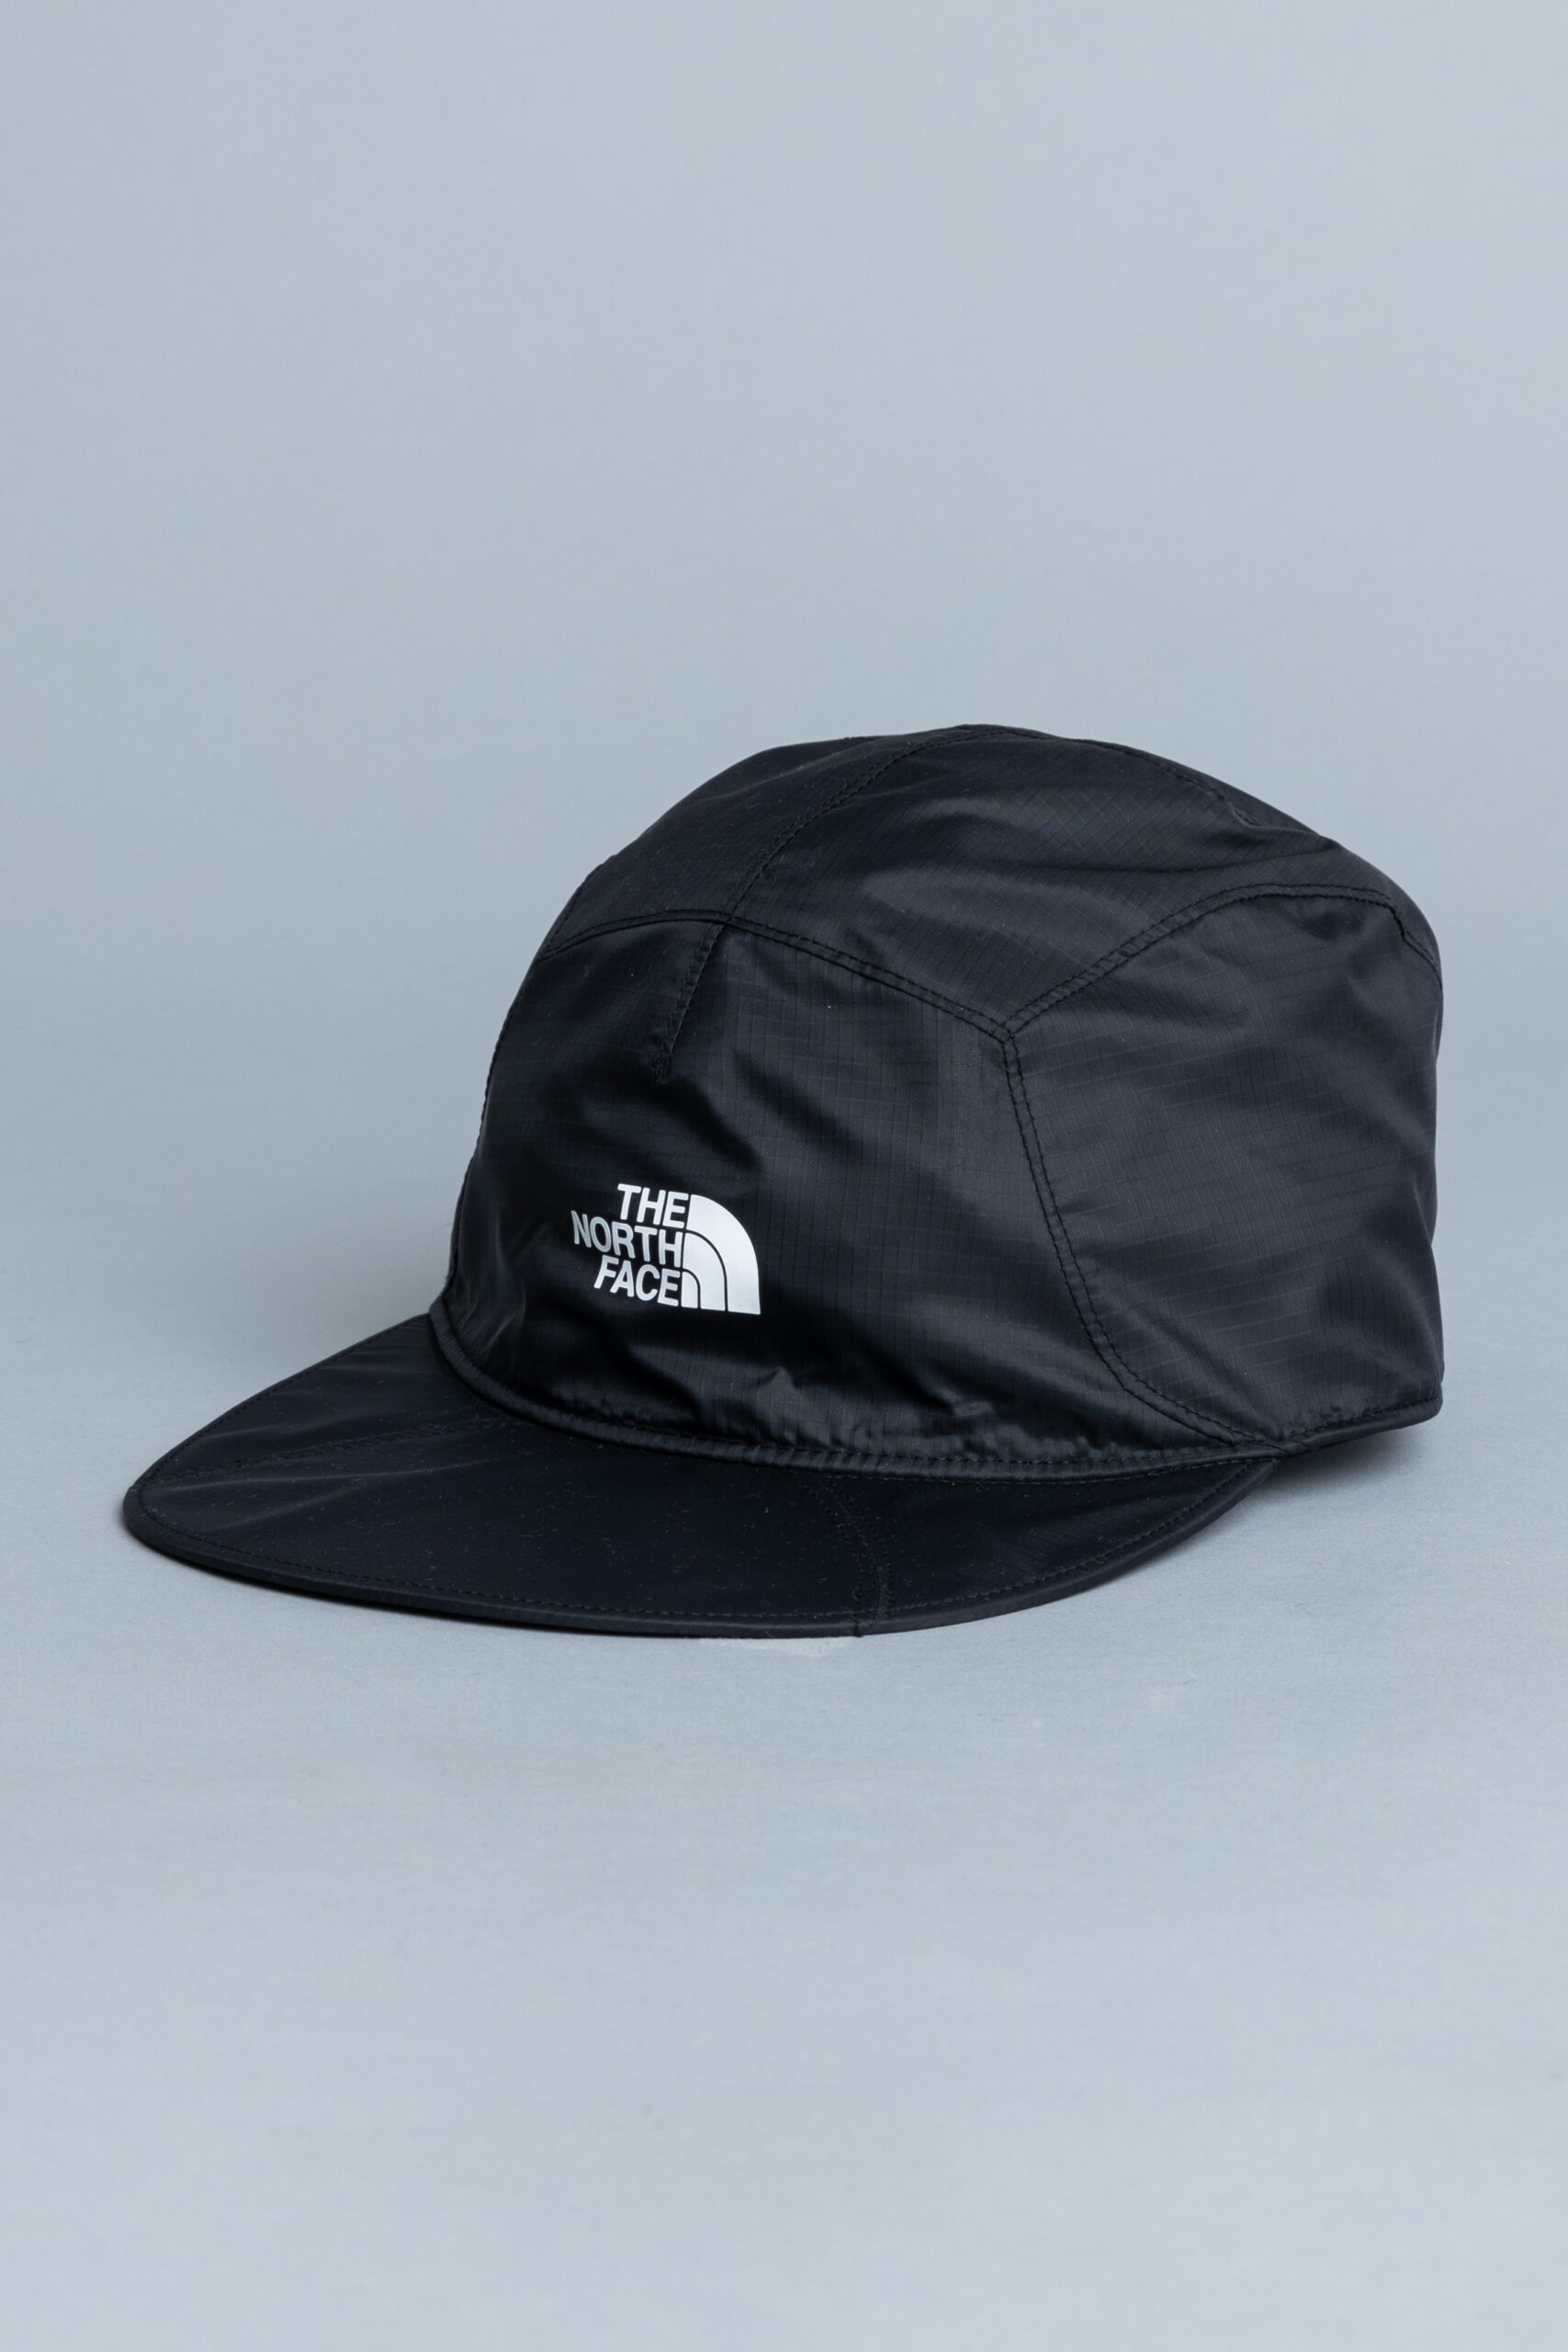 The North Face 92 Retro Cap Black • Centreville Store Brussels